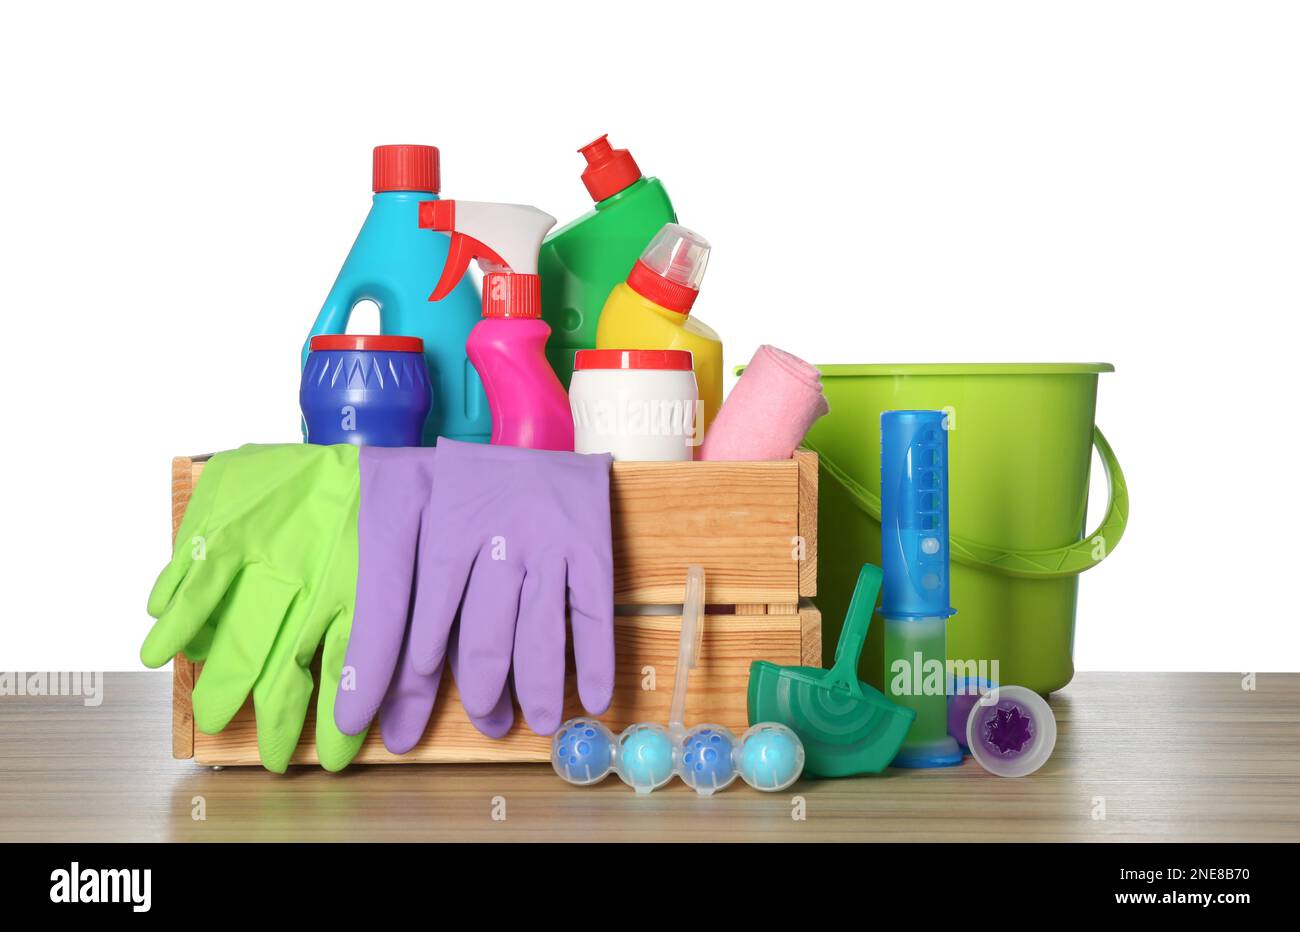 https://c8.alamy.com/comp/2NE8B70/different-toilet-cleaning-tools-and-crate-on-wooden-table-against-white-background-2NE8B70.jpg